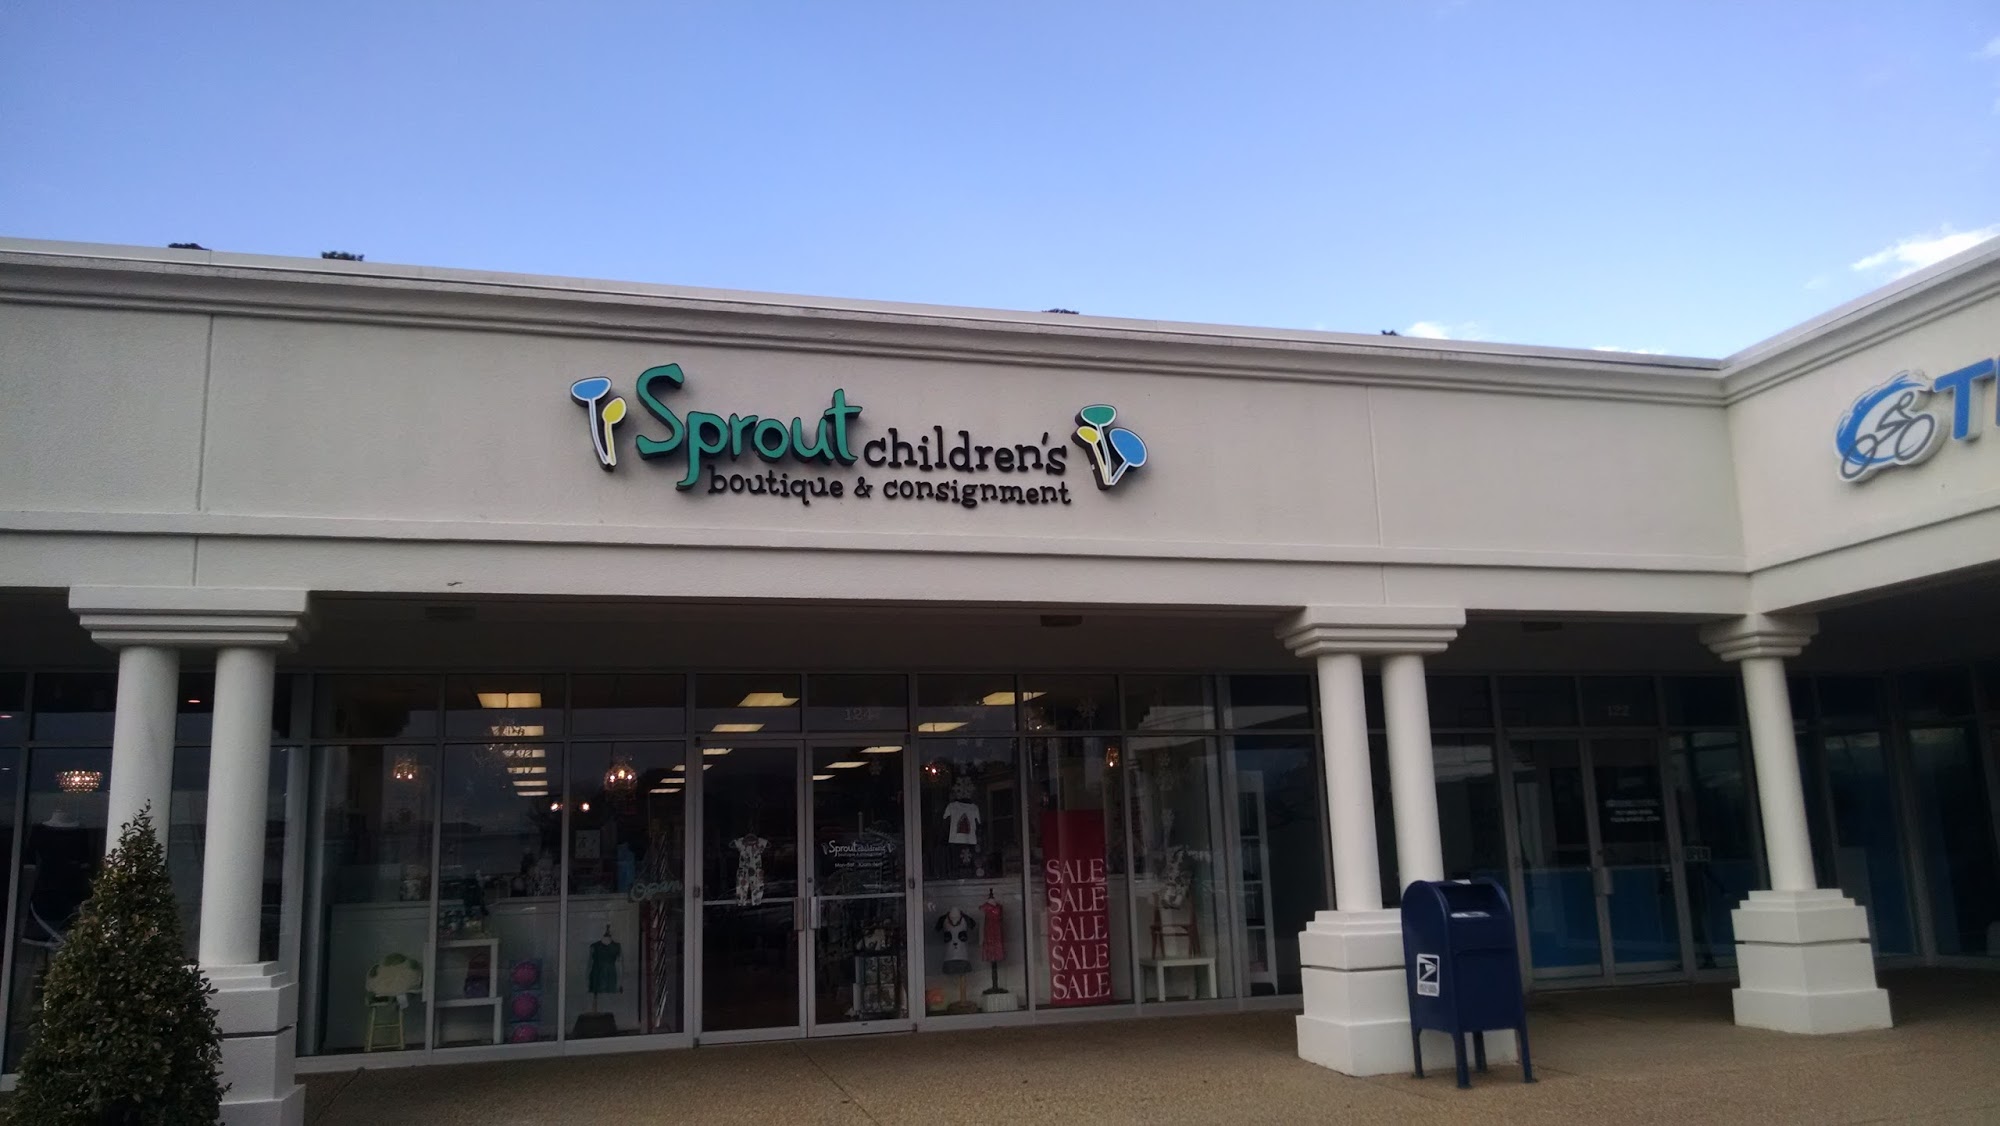 Sprout Children’s Boutique and Consignment